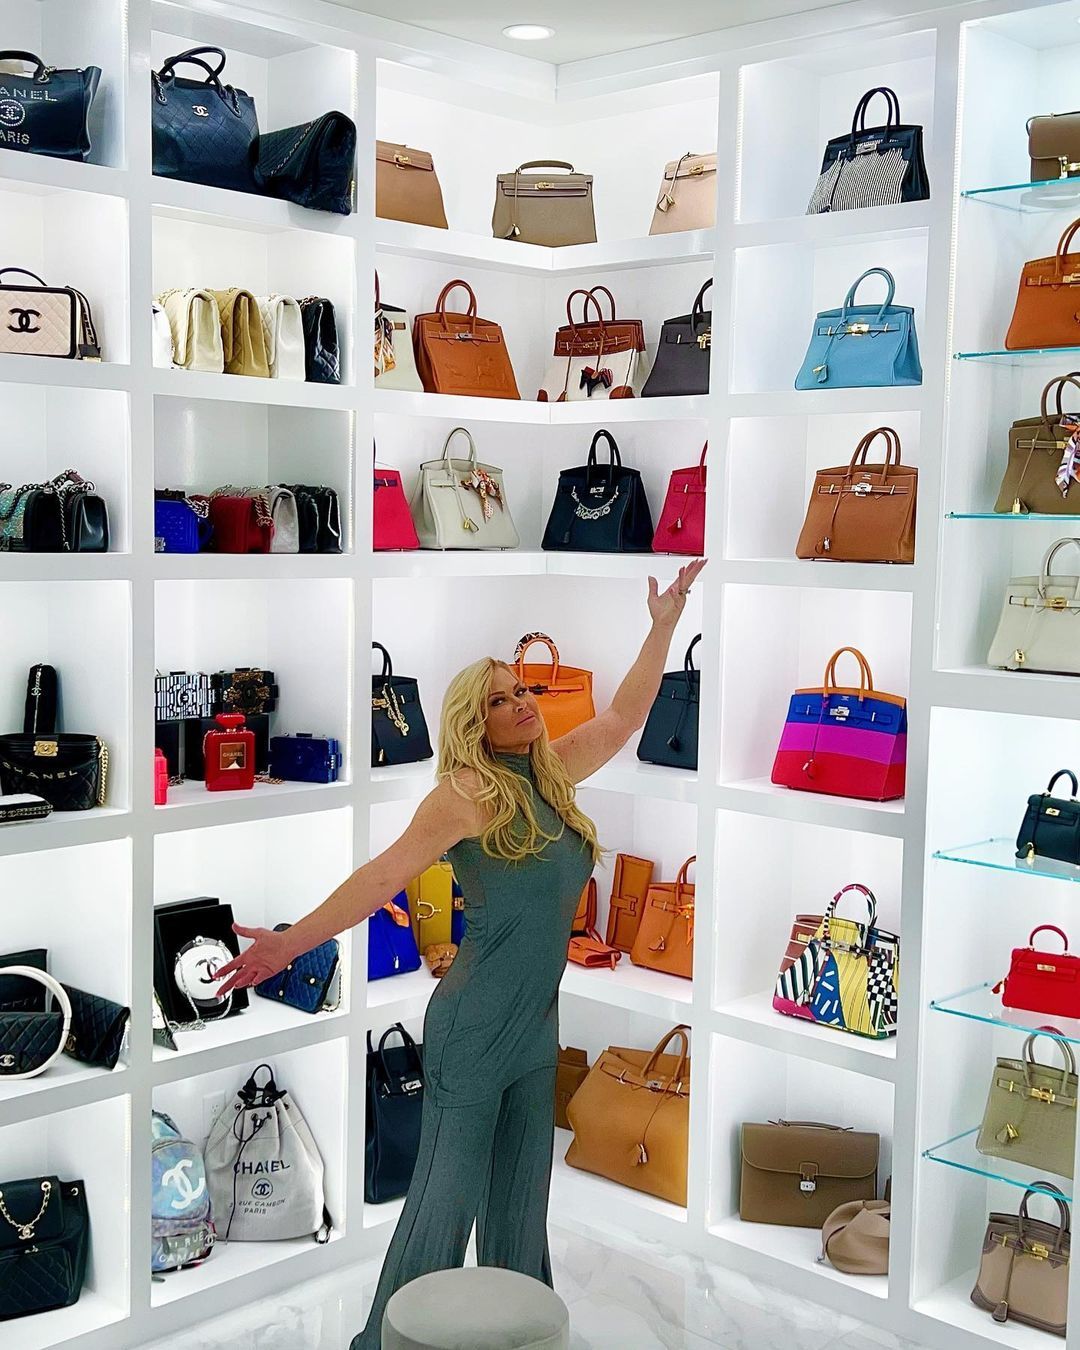 Meet Theresa Roemer: The Woman With the Biggest Closet In America